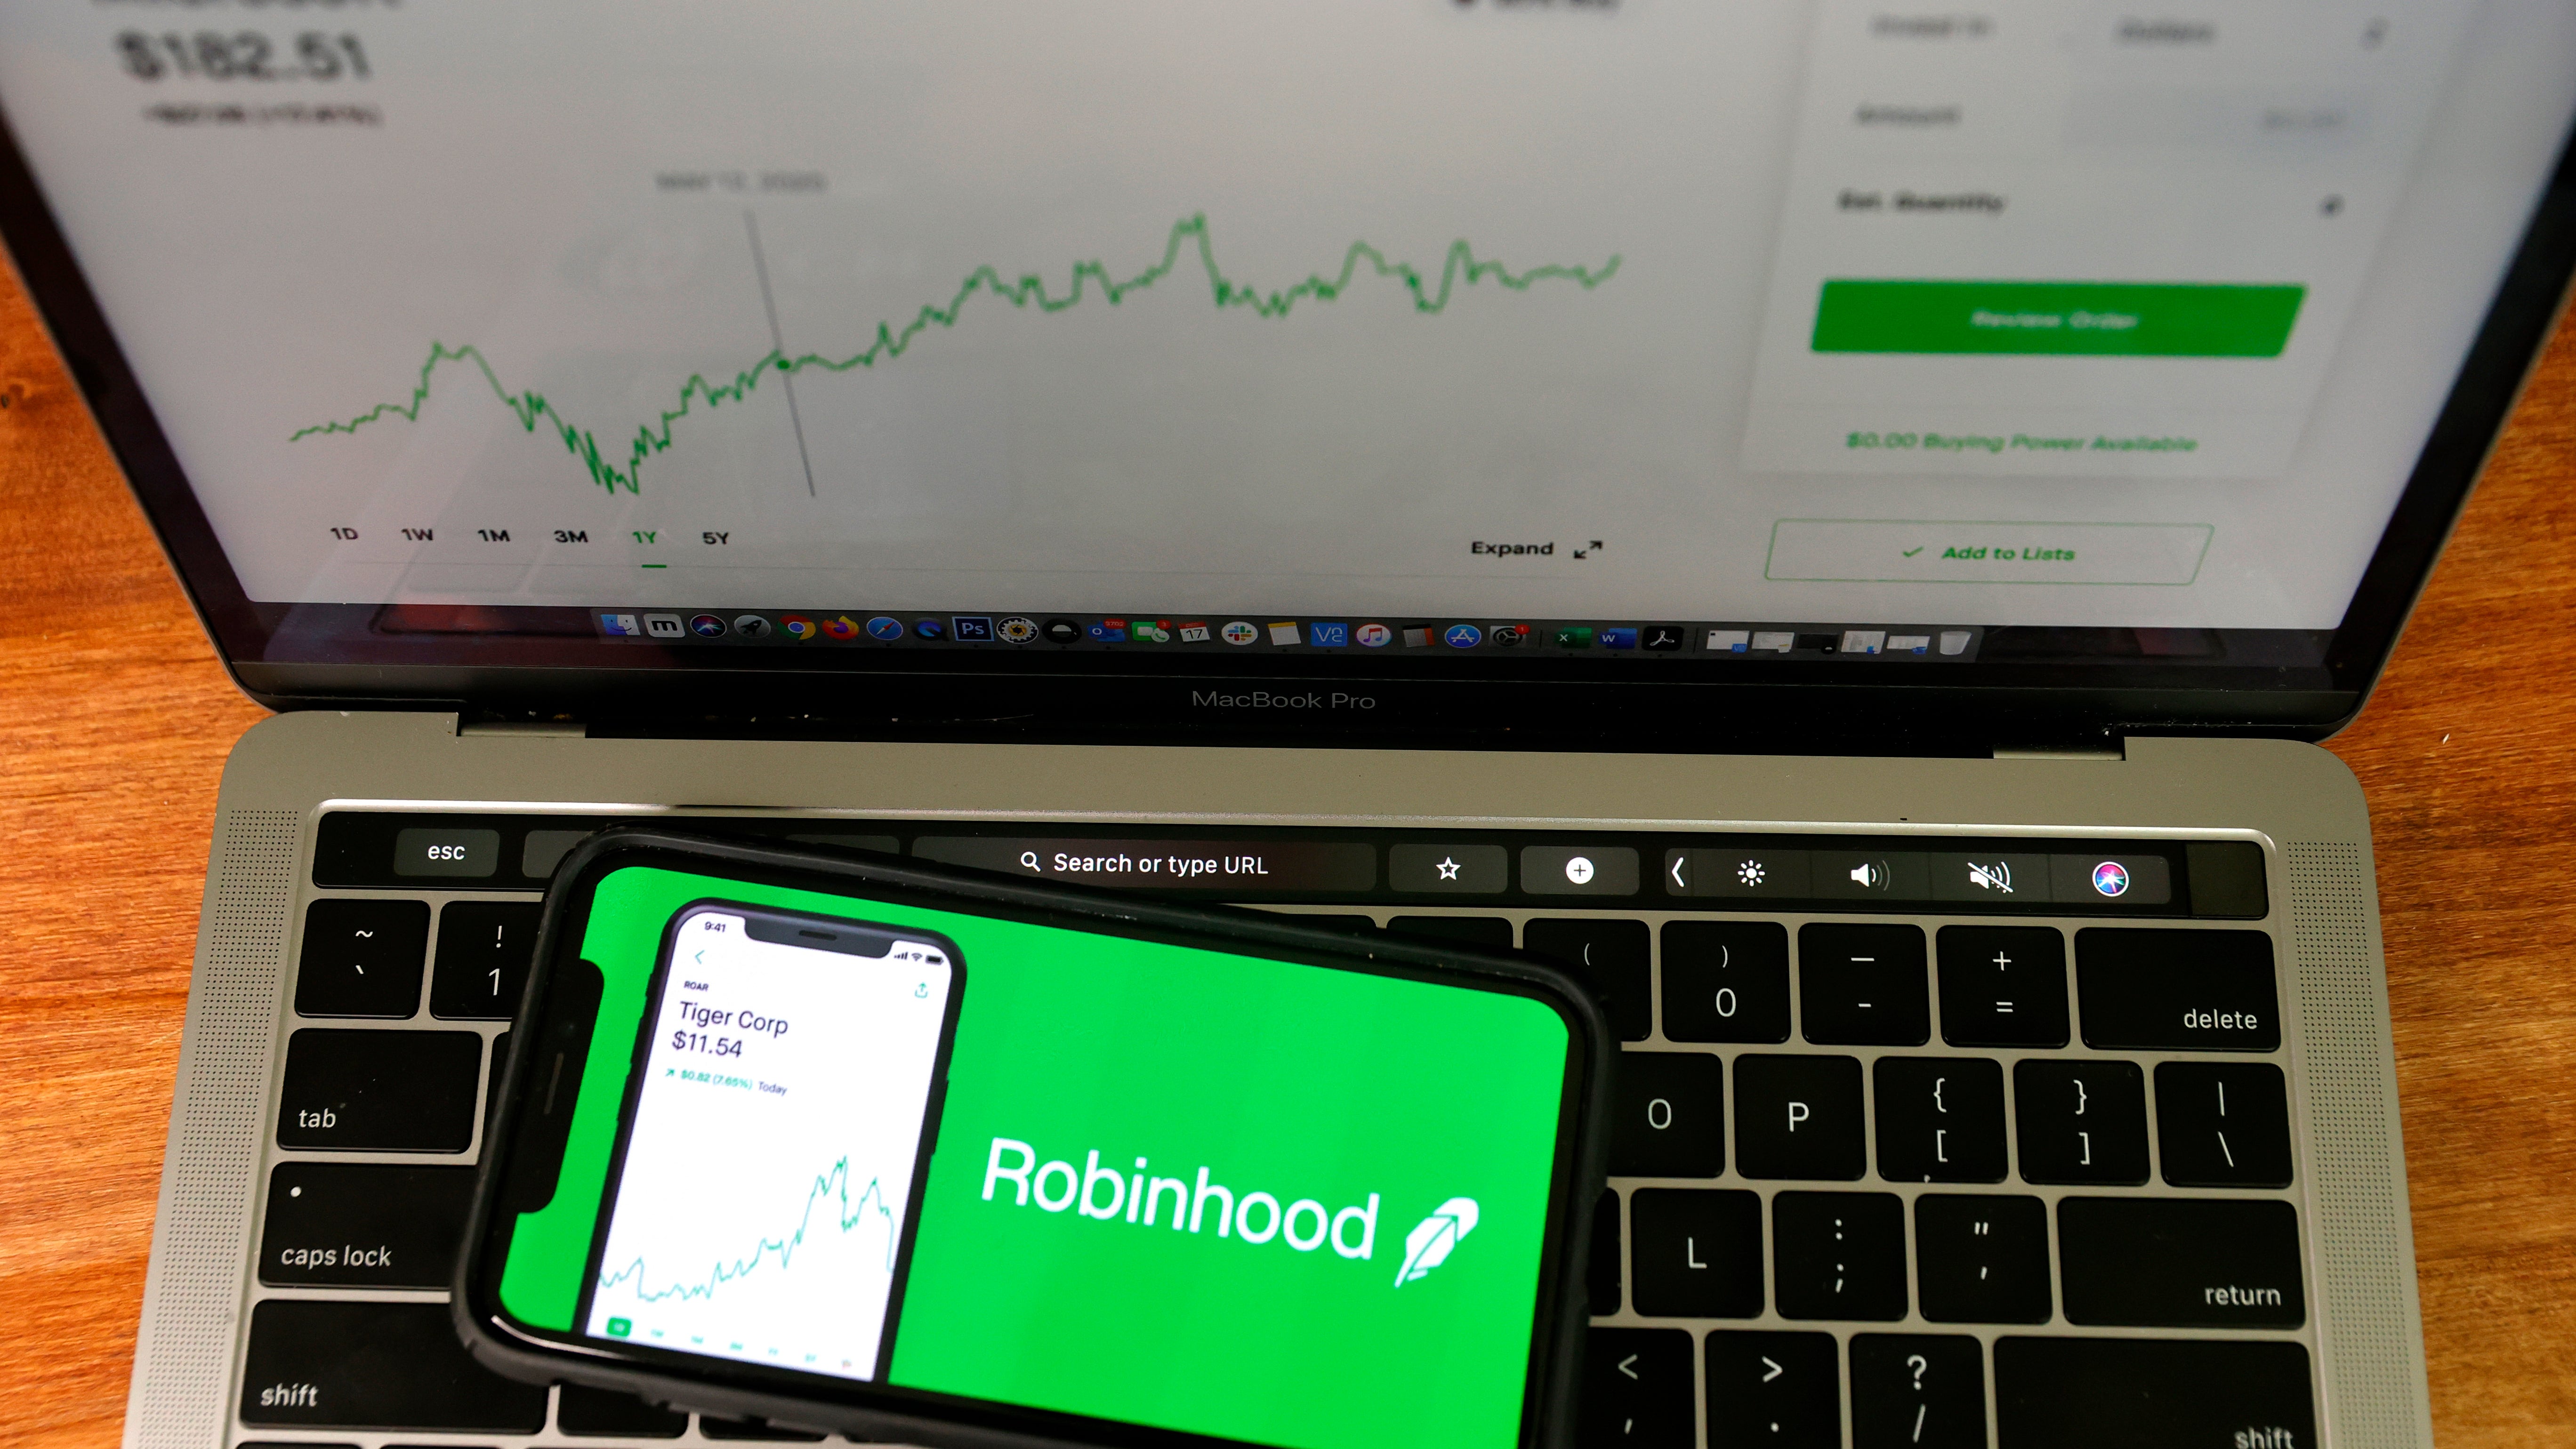 Robinhood cuts trading fees, grows profits with in-house clearing